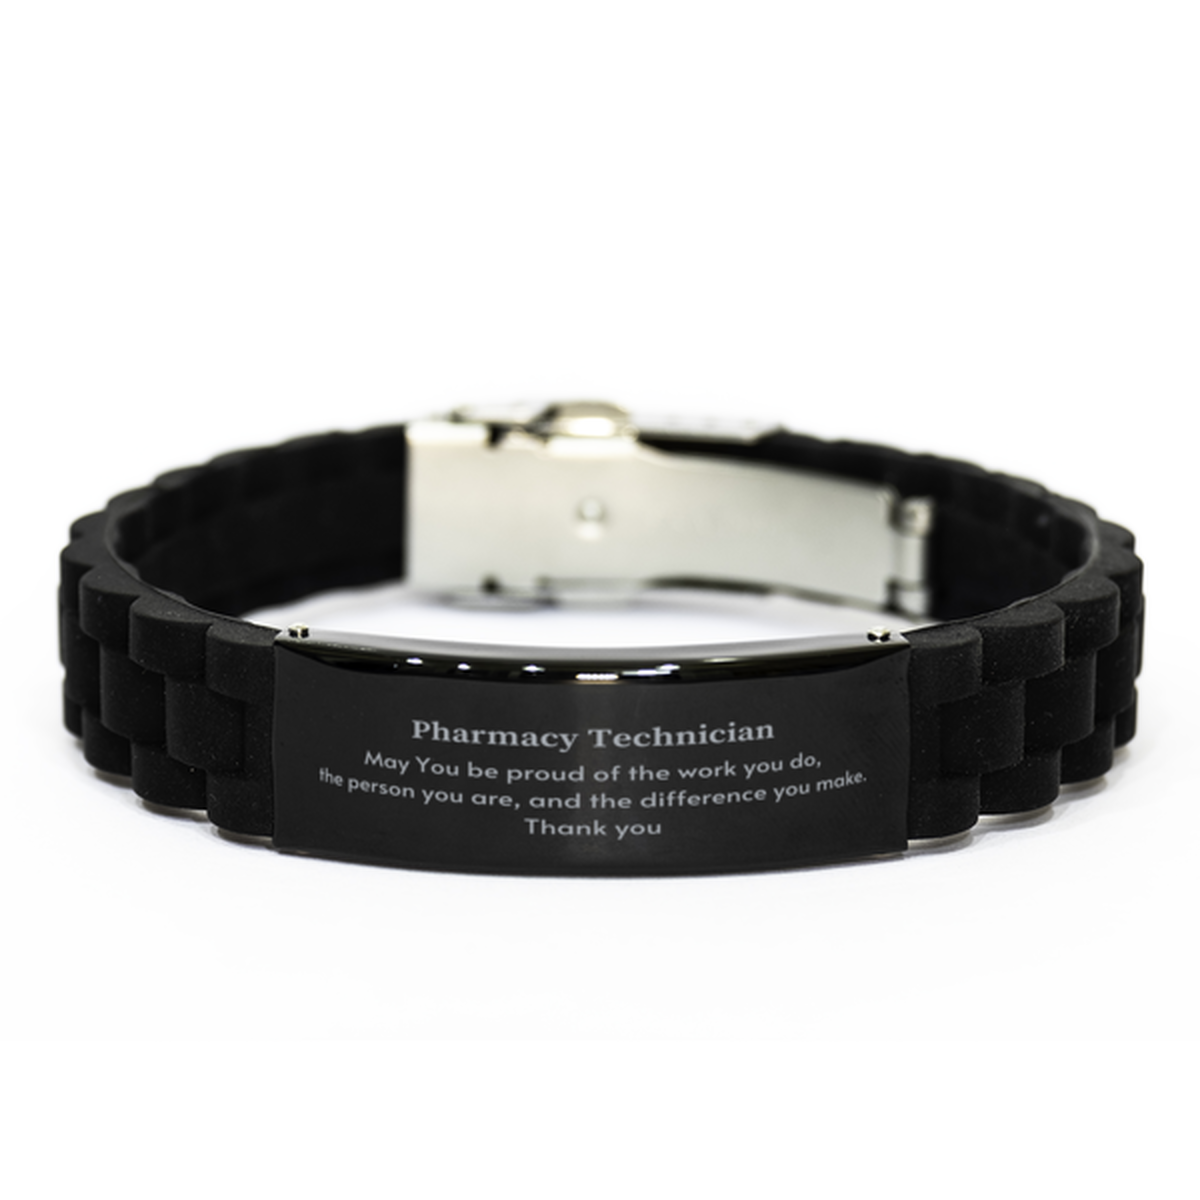 Heartwarming Black Glidelock Clasp Bracelet Retirement Coworkers Gifts for Pharmacy Technician, Pharmacy Technician May You be proud of the work you do, the person you are Gifts for Boss Men Women Friends